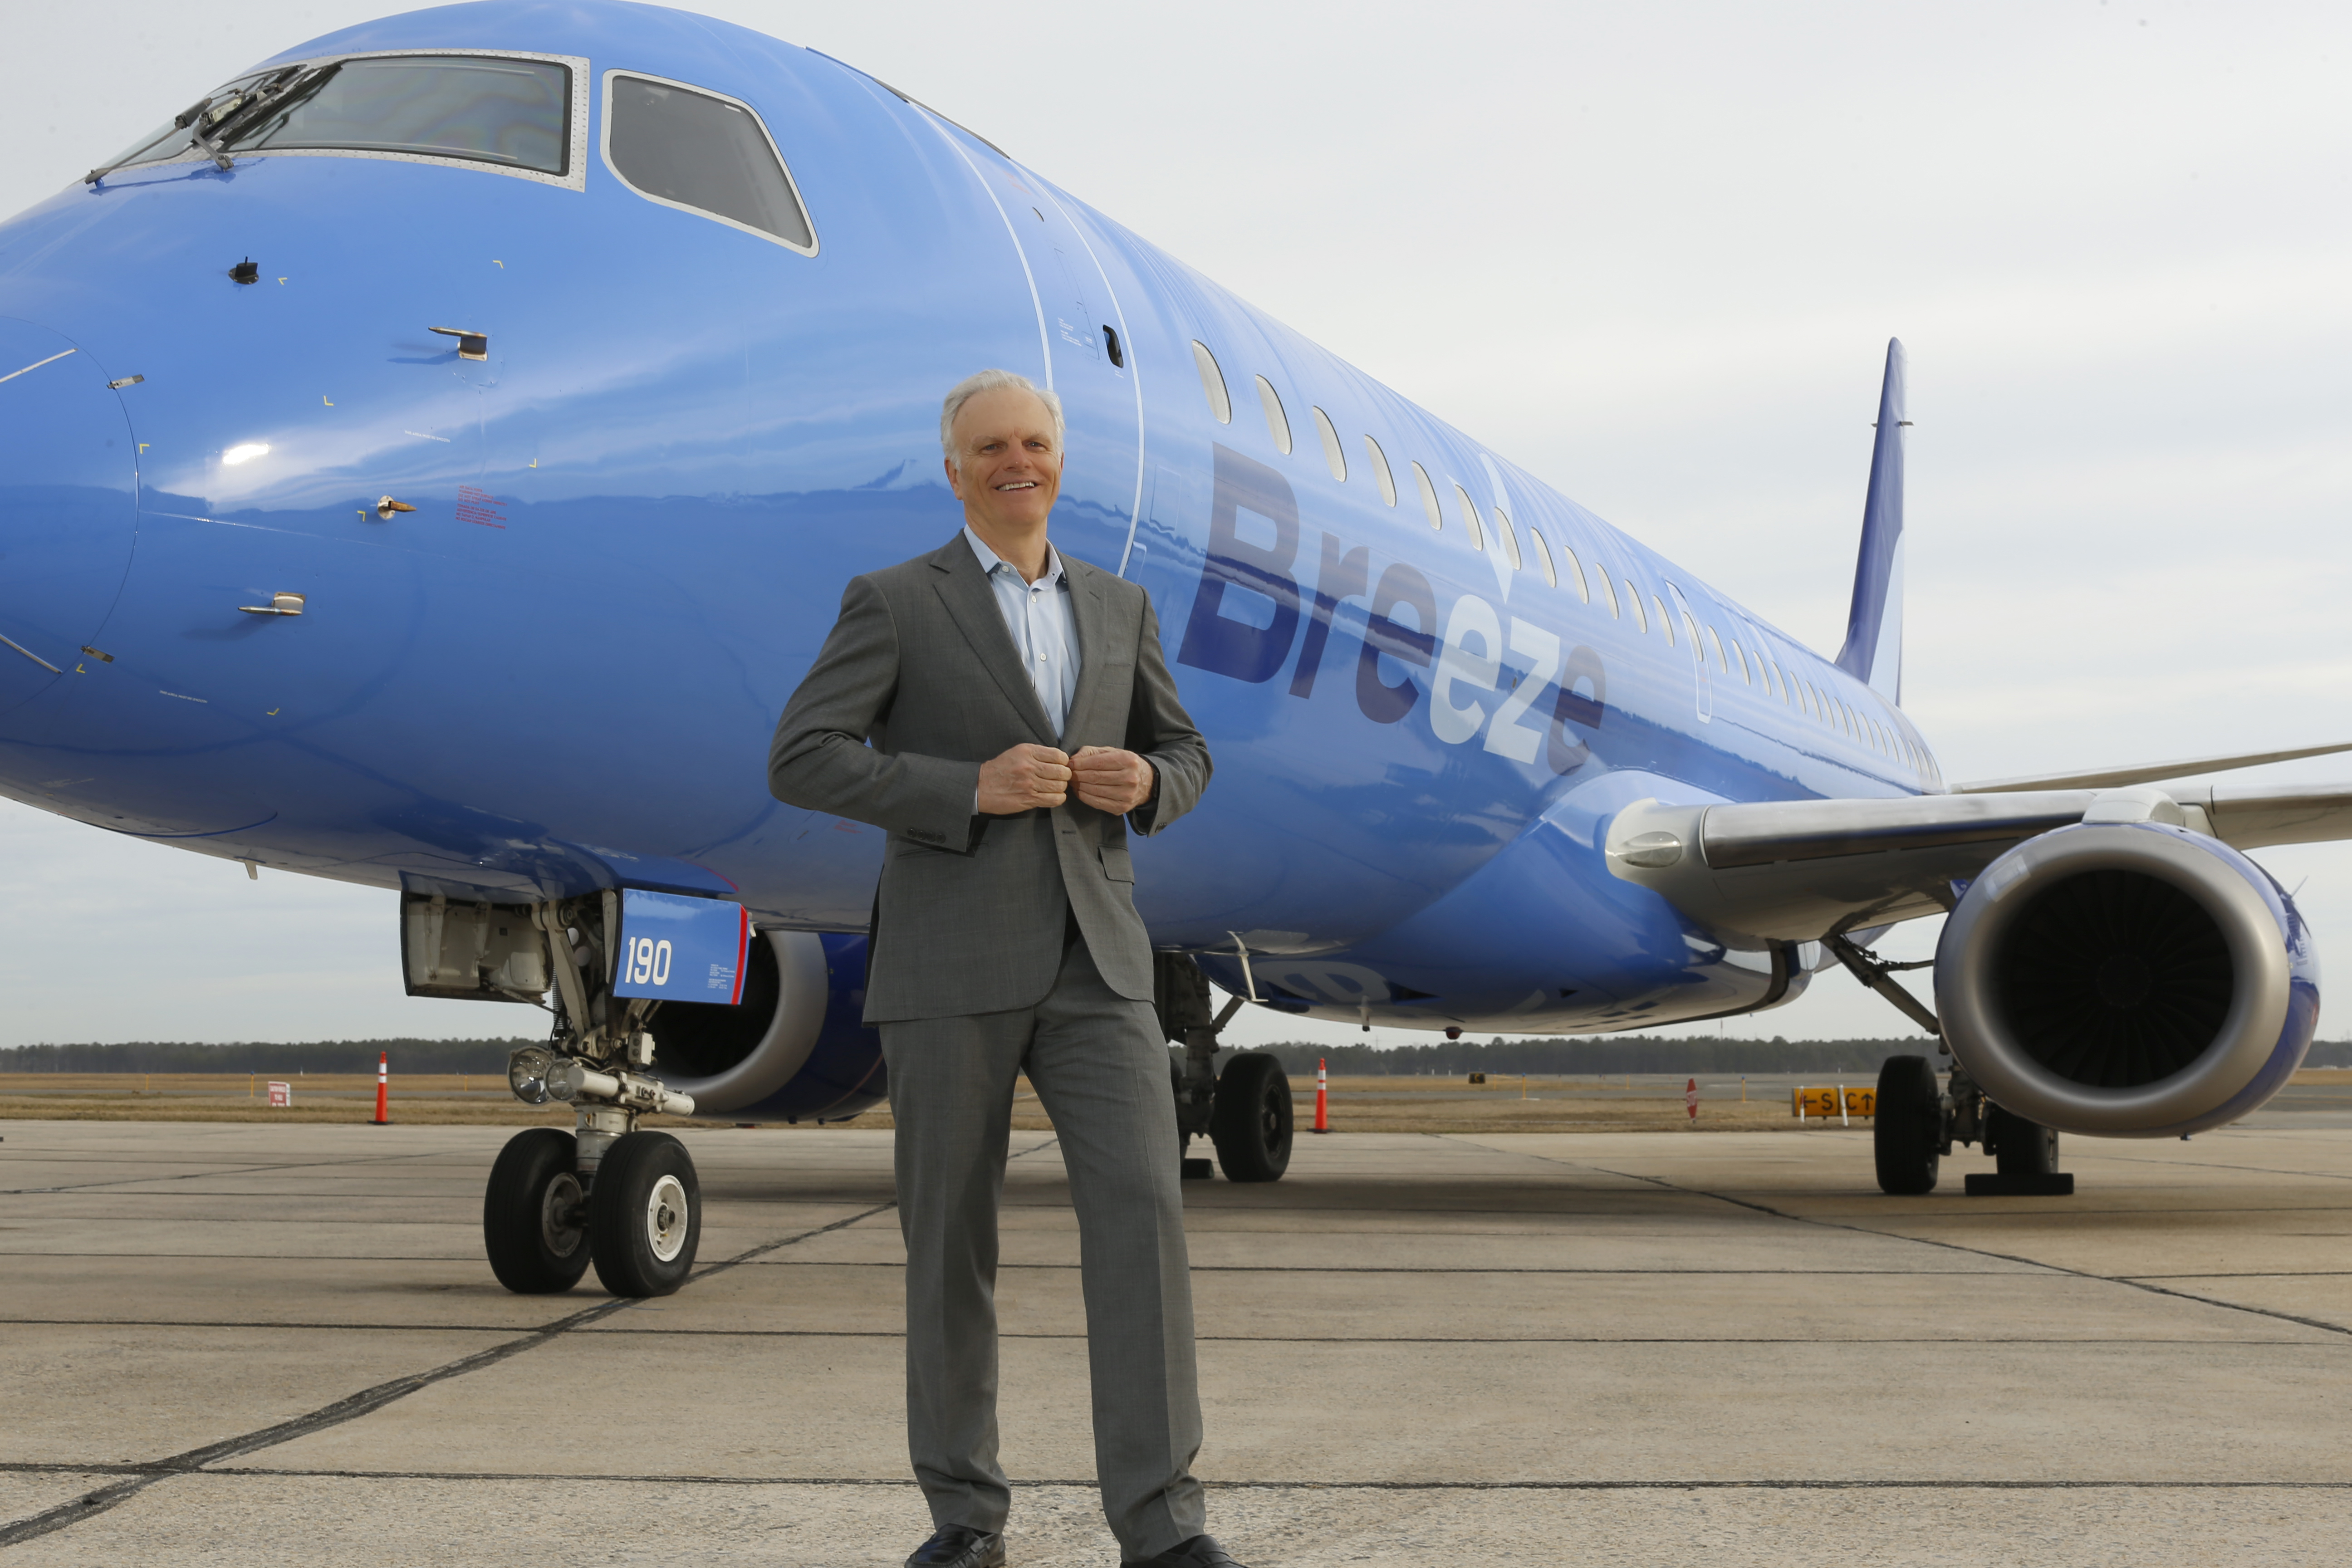 Breeze Airways Ceo David Neeleman Talks Possible Growth At Cak History With Jetblue Azul And The Advantages Of Add Cleveland Com